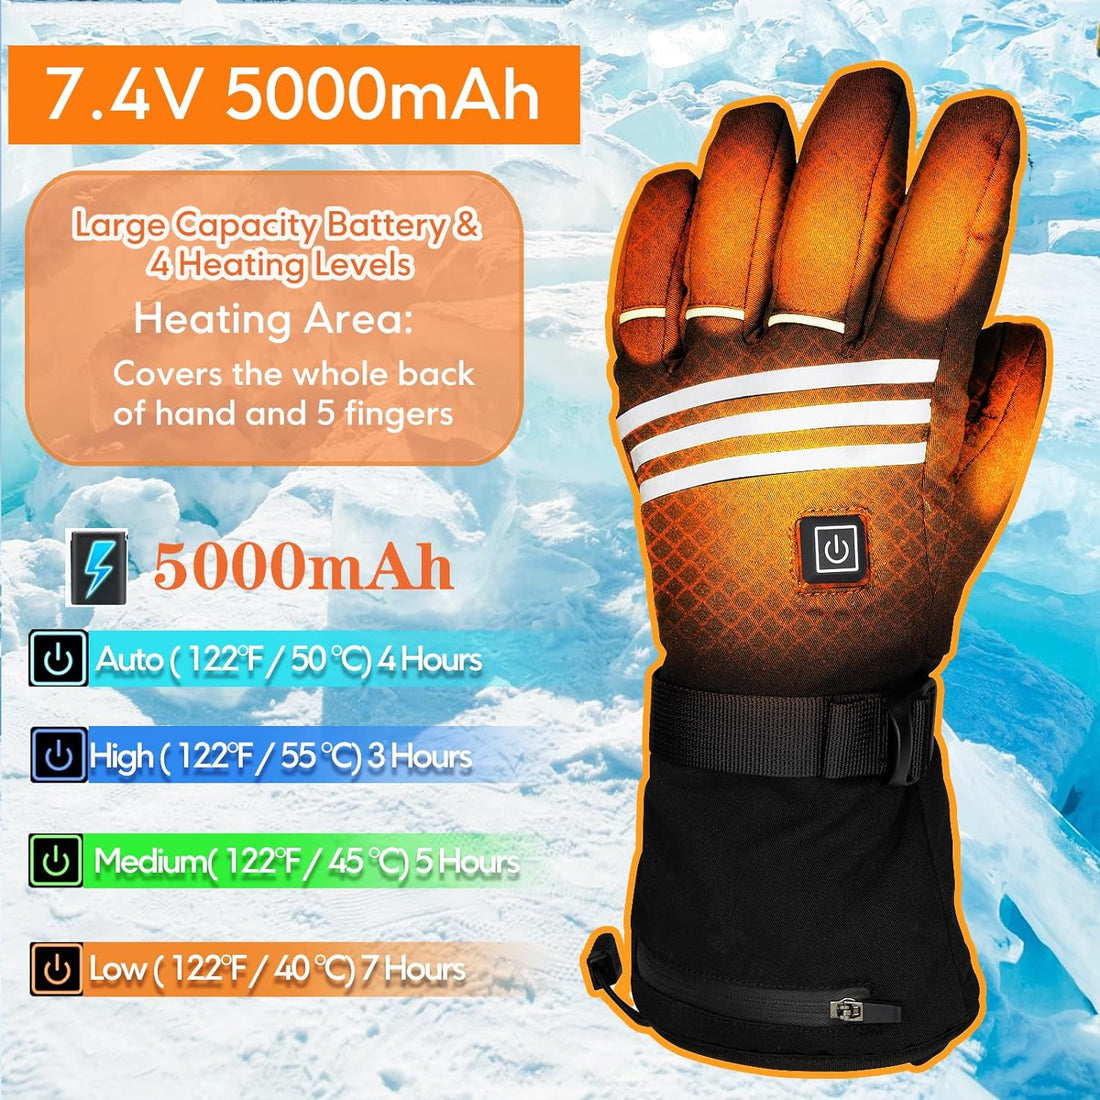 Hccsport Heated Gloves for Men Women, Rechargeable 5000mAh Windproof Battery Electric Gloves Camping Hand Warmers, Touchscreen for Motorcycle Outdoor Skiing Cycling Hiking Working - Medium